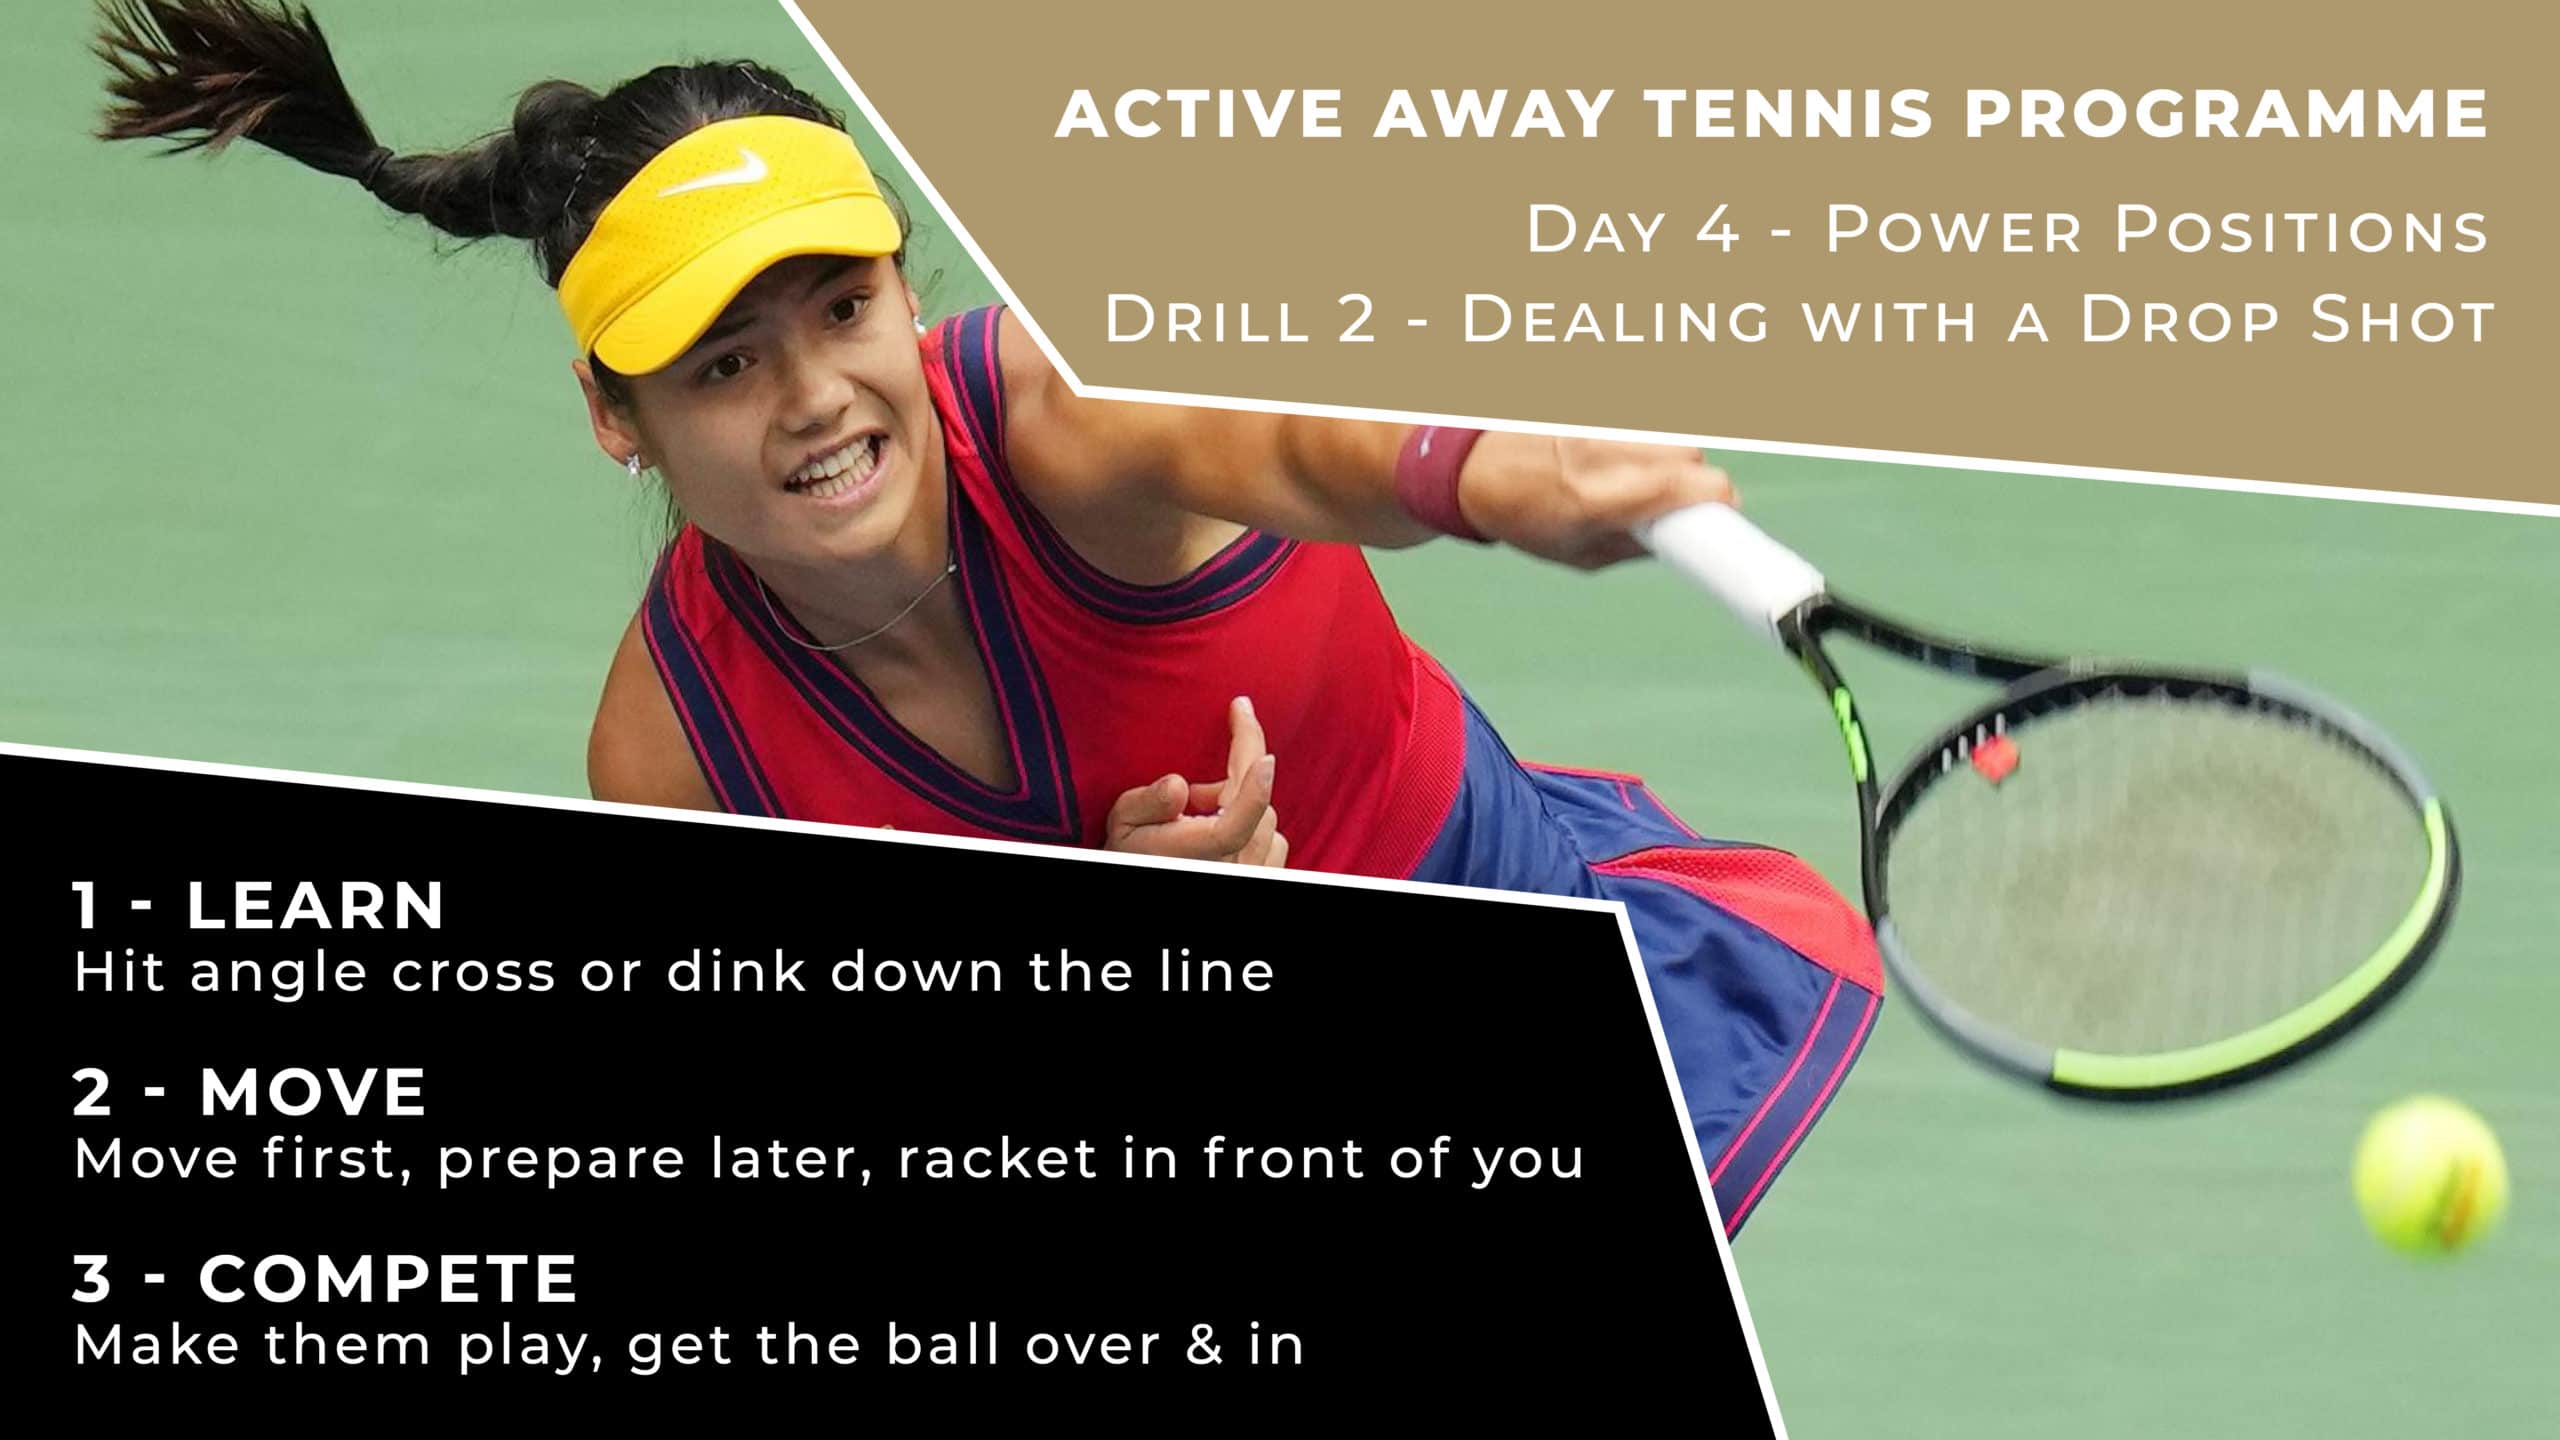 Day 4 - Power Positions Drill 2 - Dealing with a Drop Shot | Active Away Tennis Programme